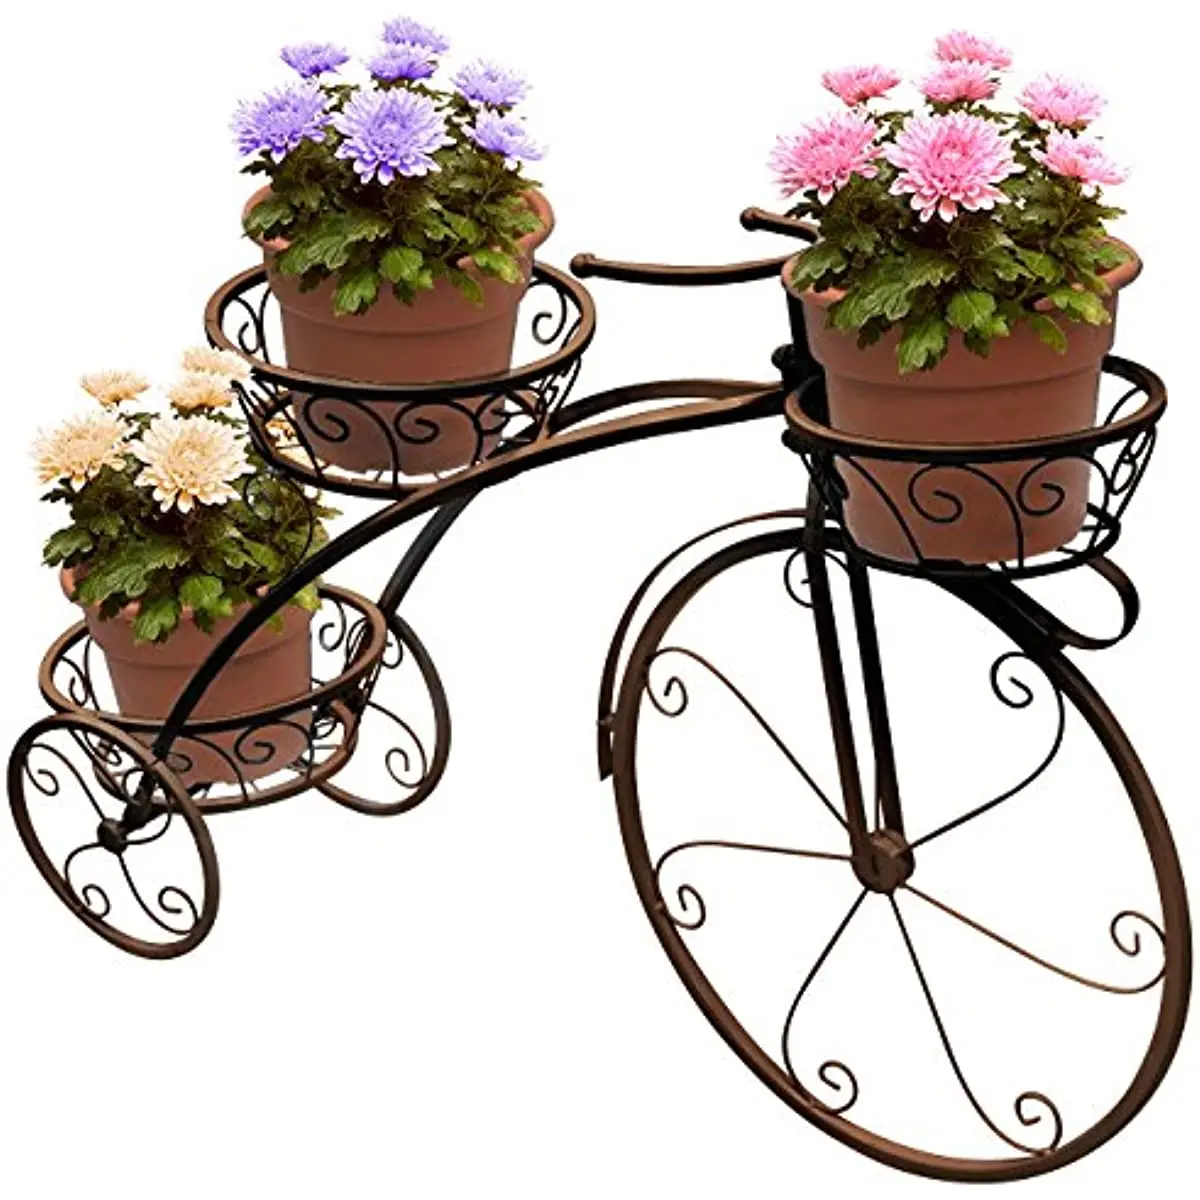 

Sorbus Tricycle Plant Stand - Ideal for Home,Garden,Patio - Great Gift for Plant Lovers,Mother’s Day - Parisian Style